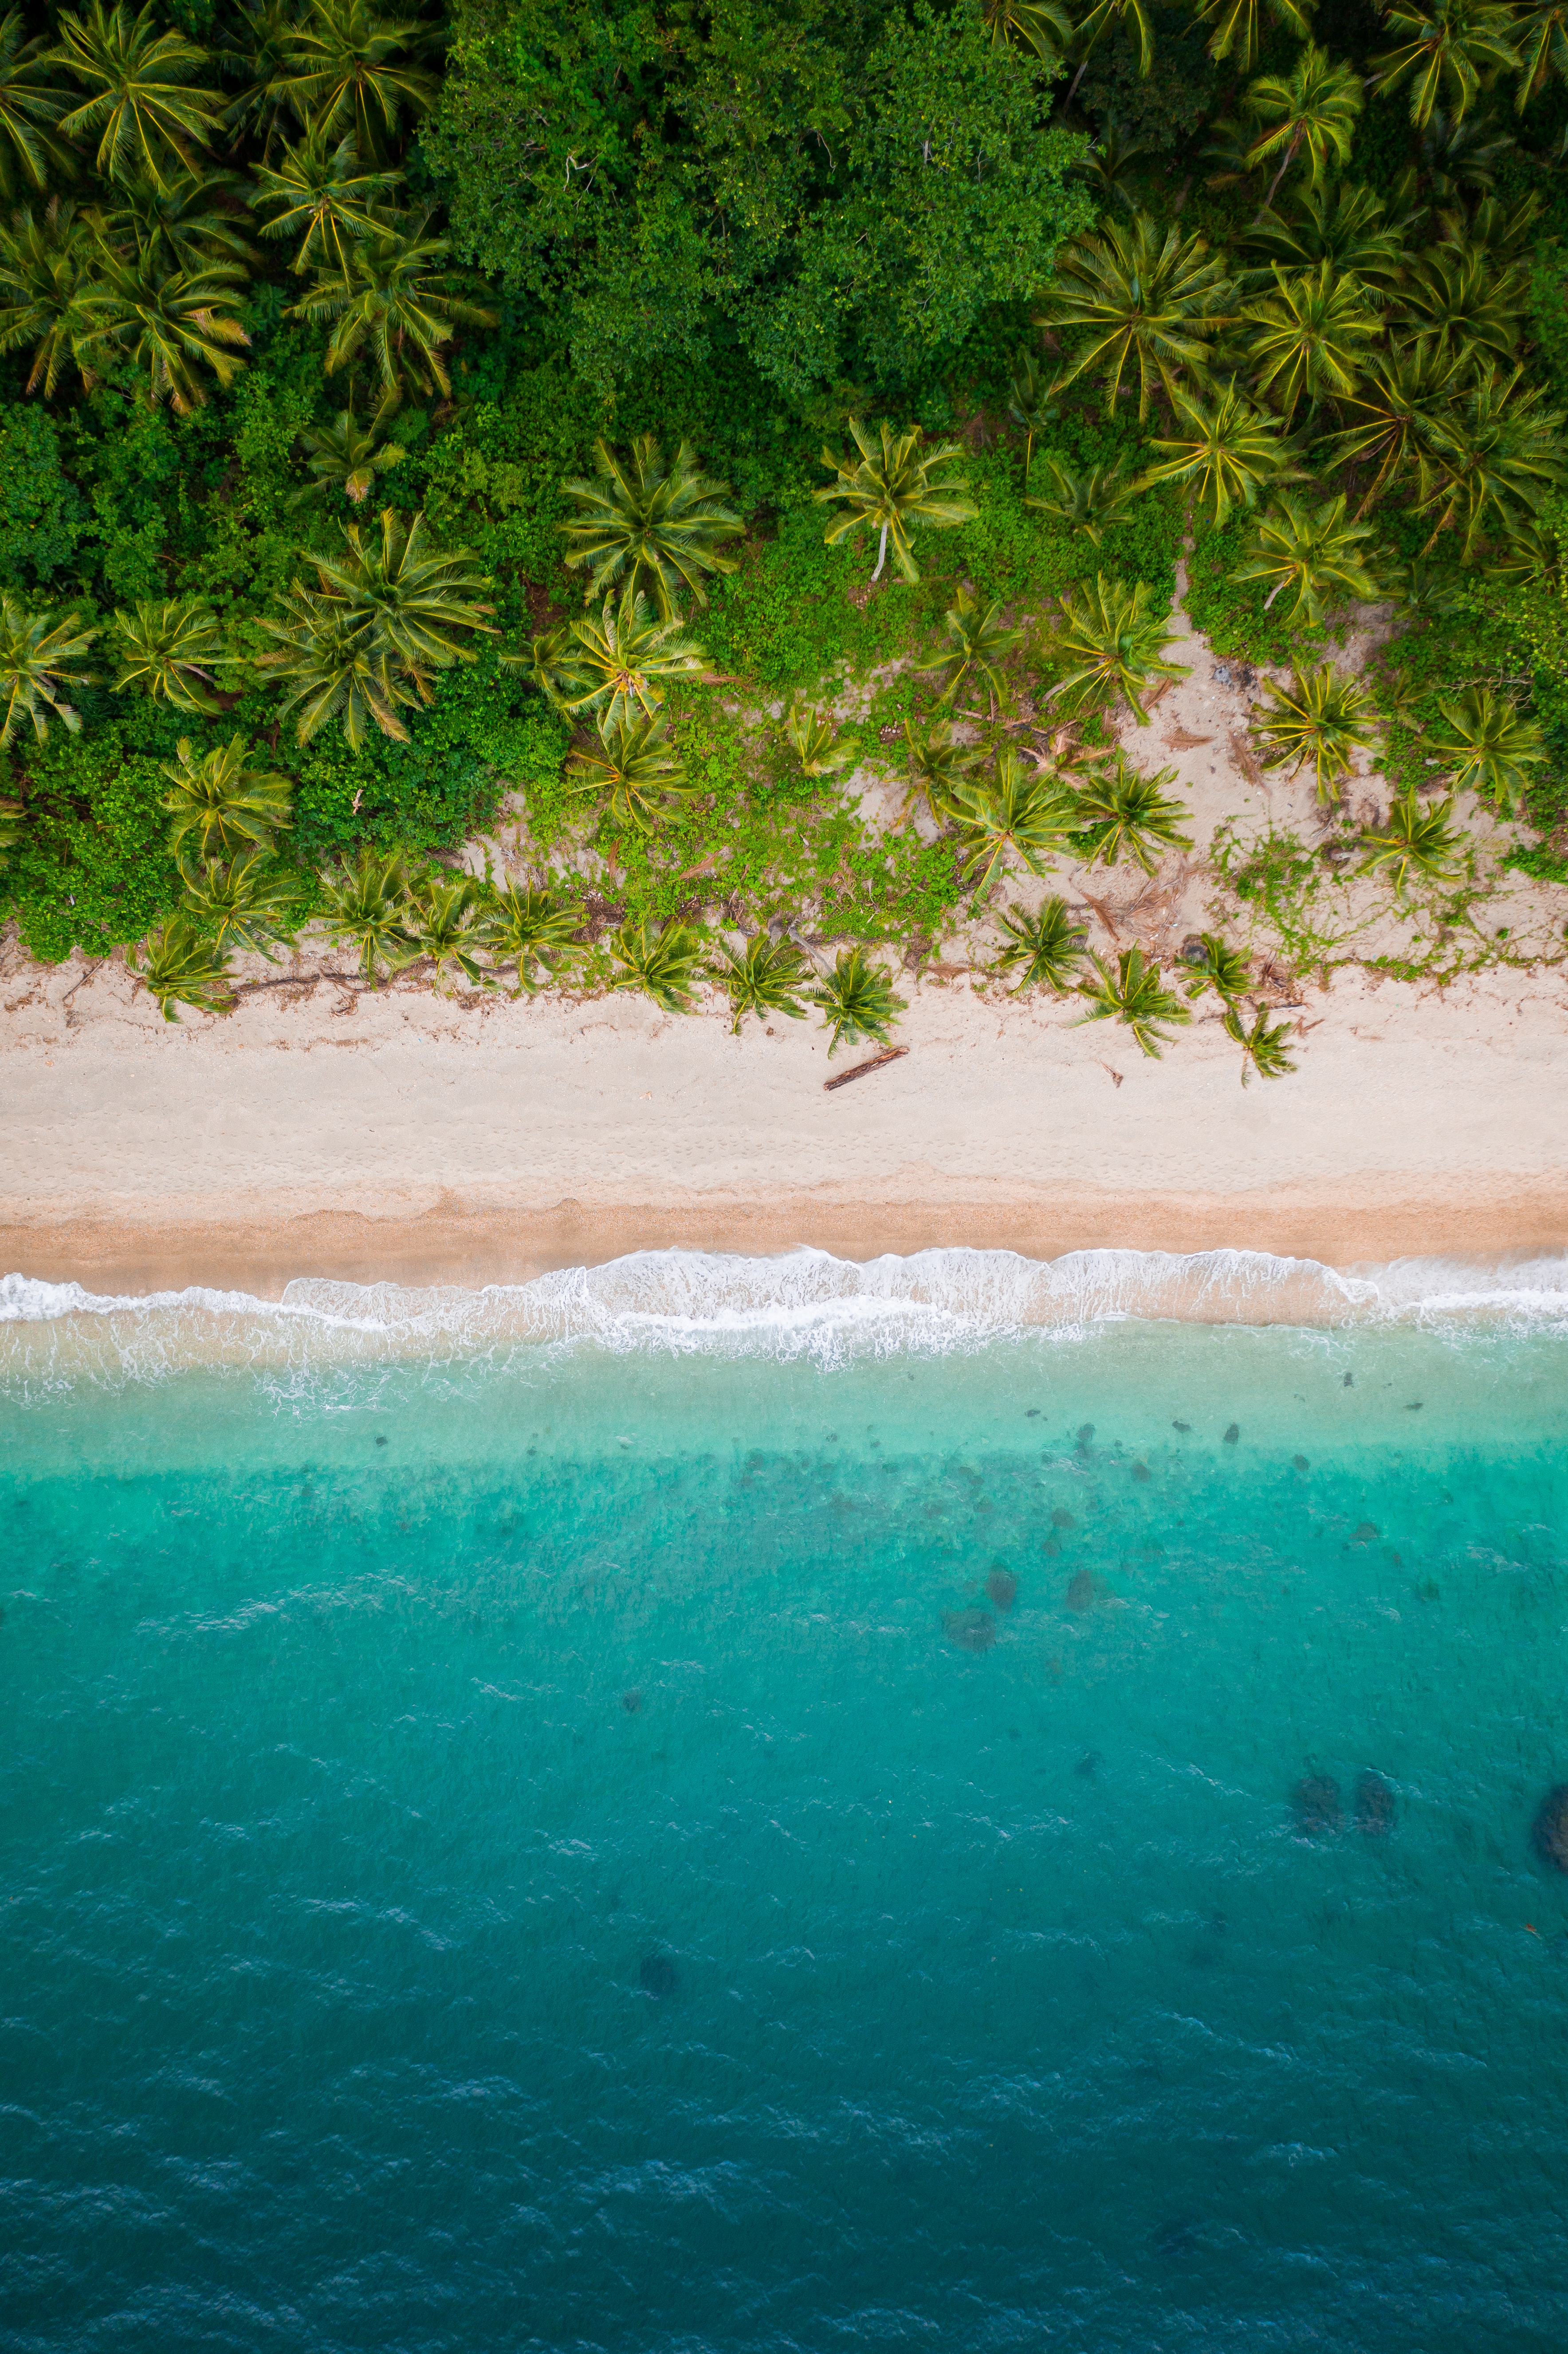 HD wallpaper view from above, bank, nature, beach, palms, sand, shore